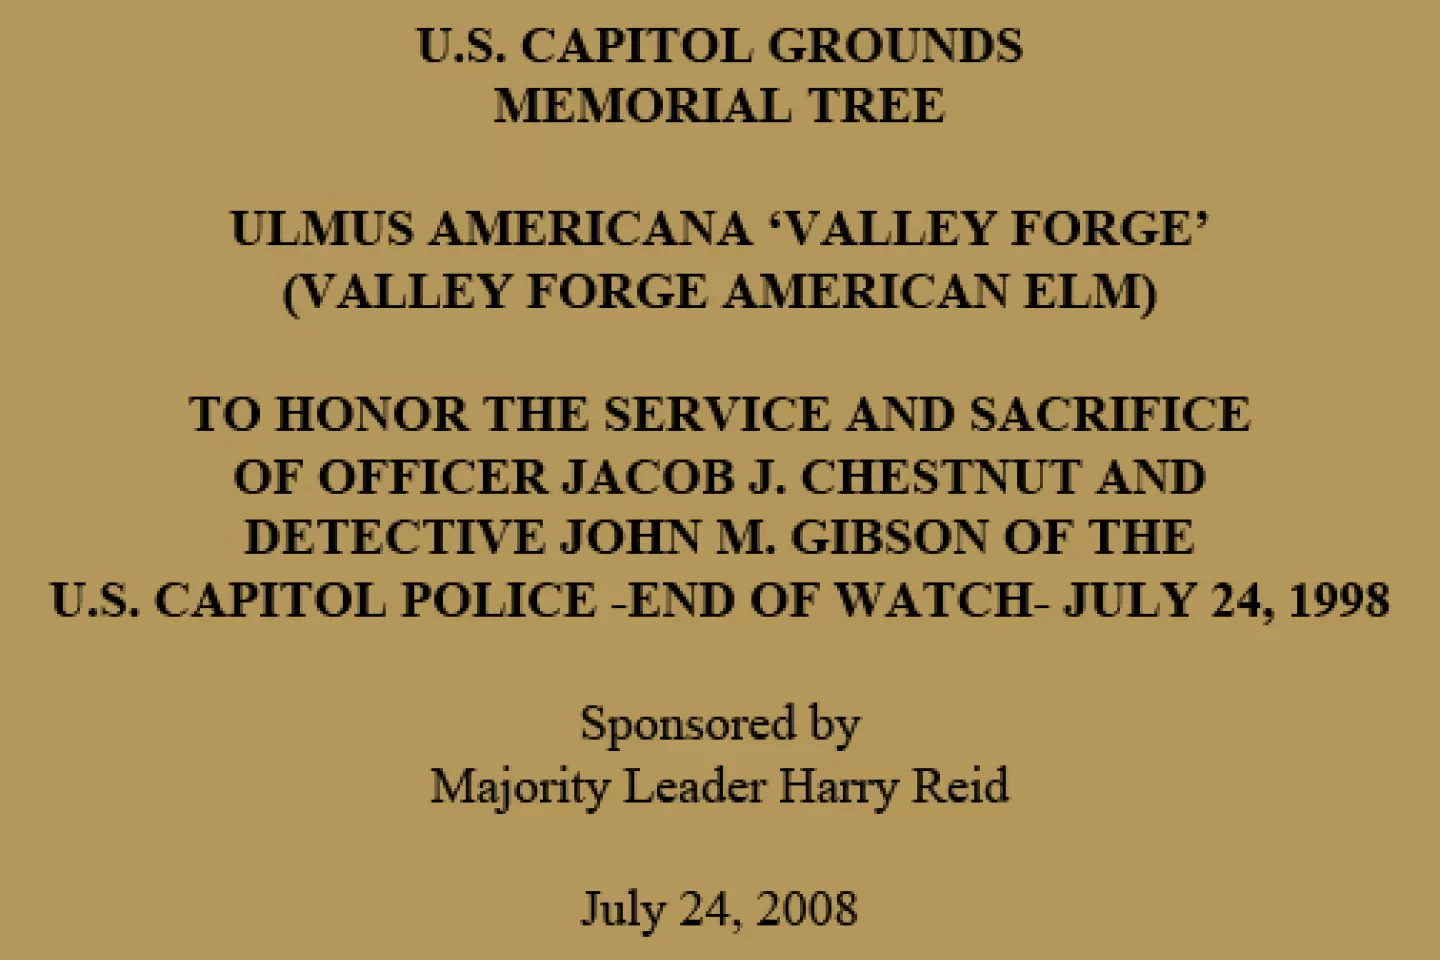 U.S. Capitol Grounds Memorial Tree  Ulmus americana ‘Valley Forge’ (Valley Forge American Elm)  To Honor the Service and Sacrifice of Officer Jacob J. Chestnut and Detective John M. Gibson of the U.S. Capitol Police -End of Watch- July 24, 1998